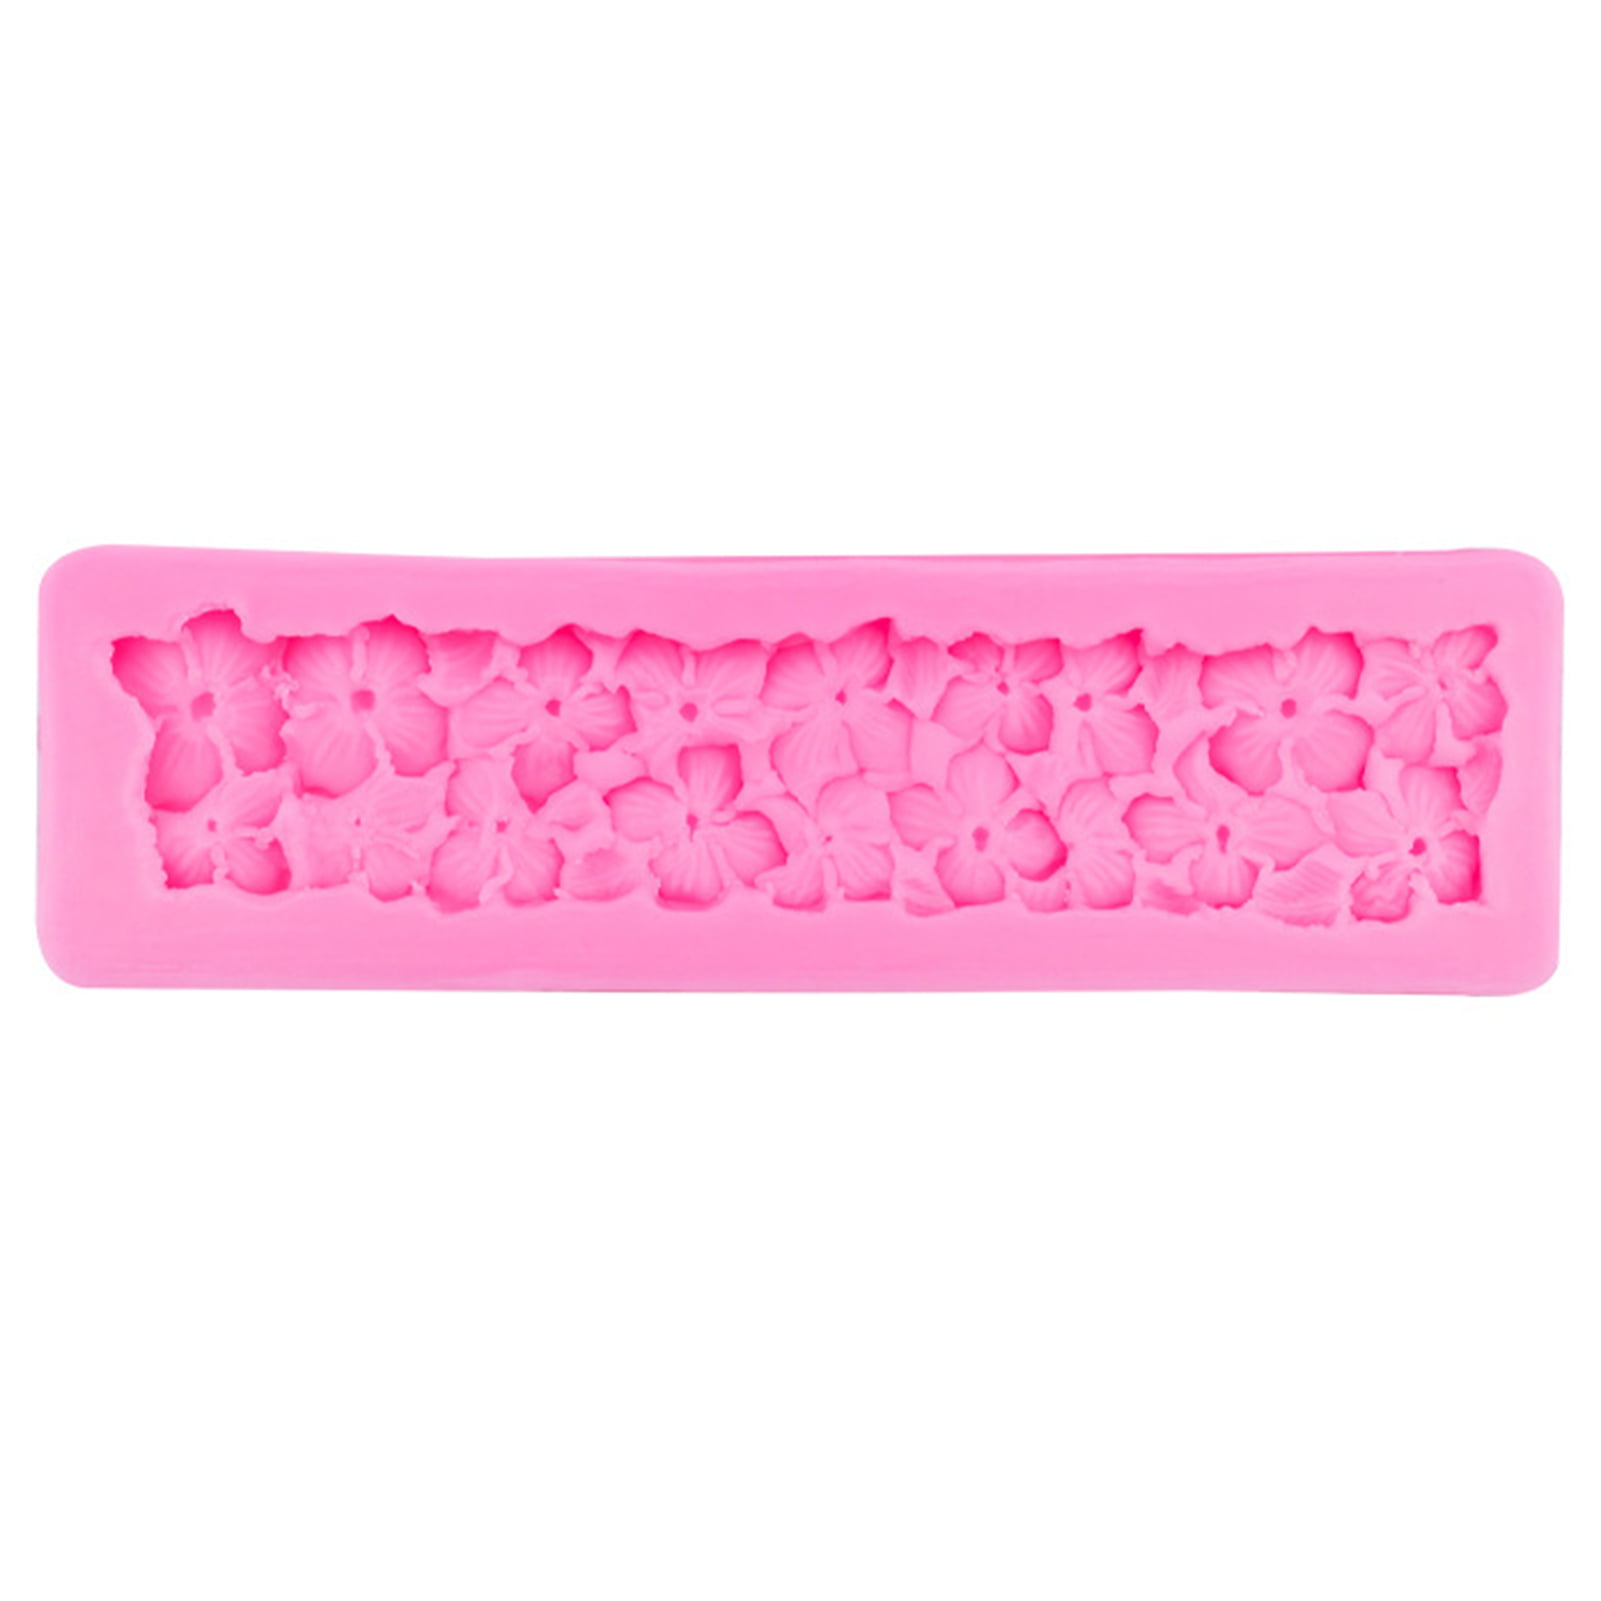 Details about   European Lace Frame Shape Fondant Cake Silicon Mold Candy Pastry Decoration Tool 